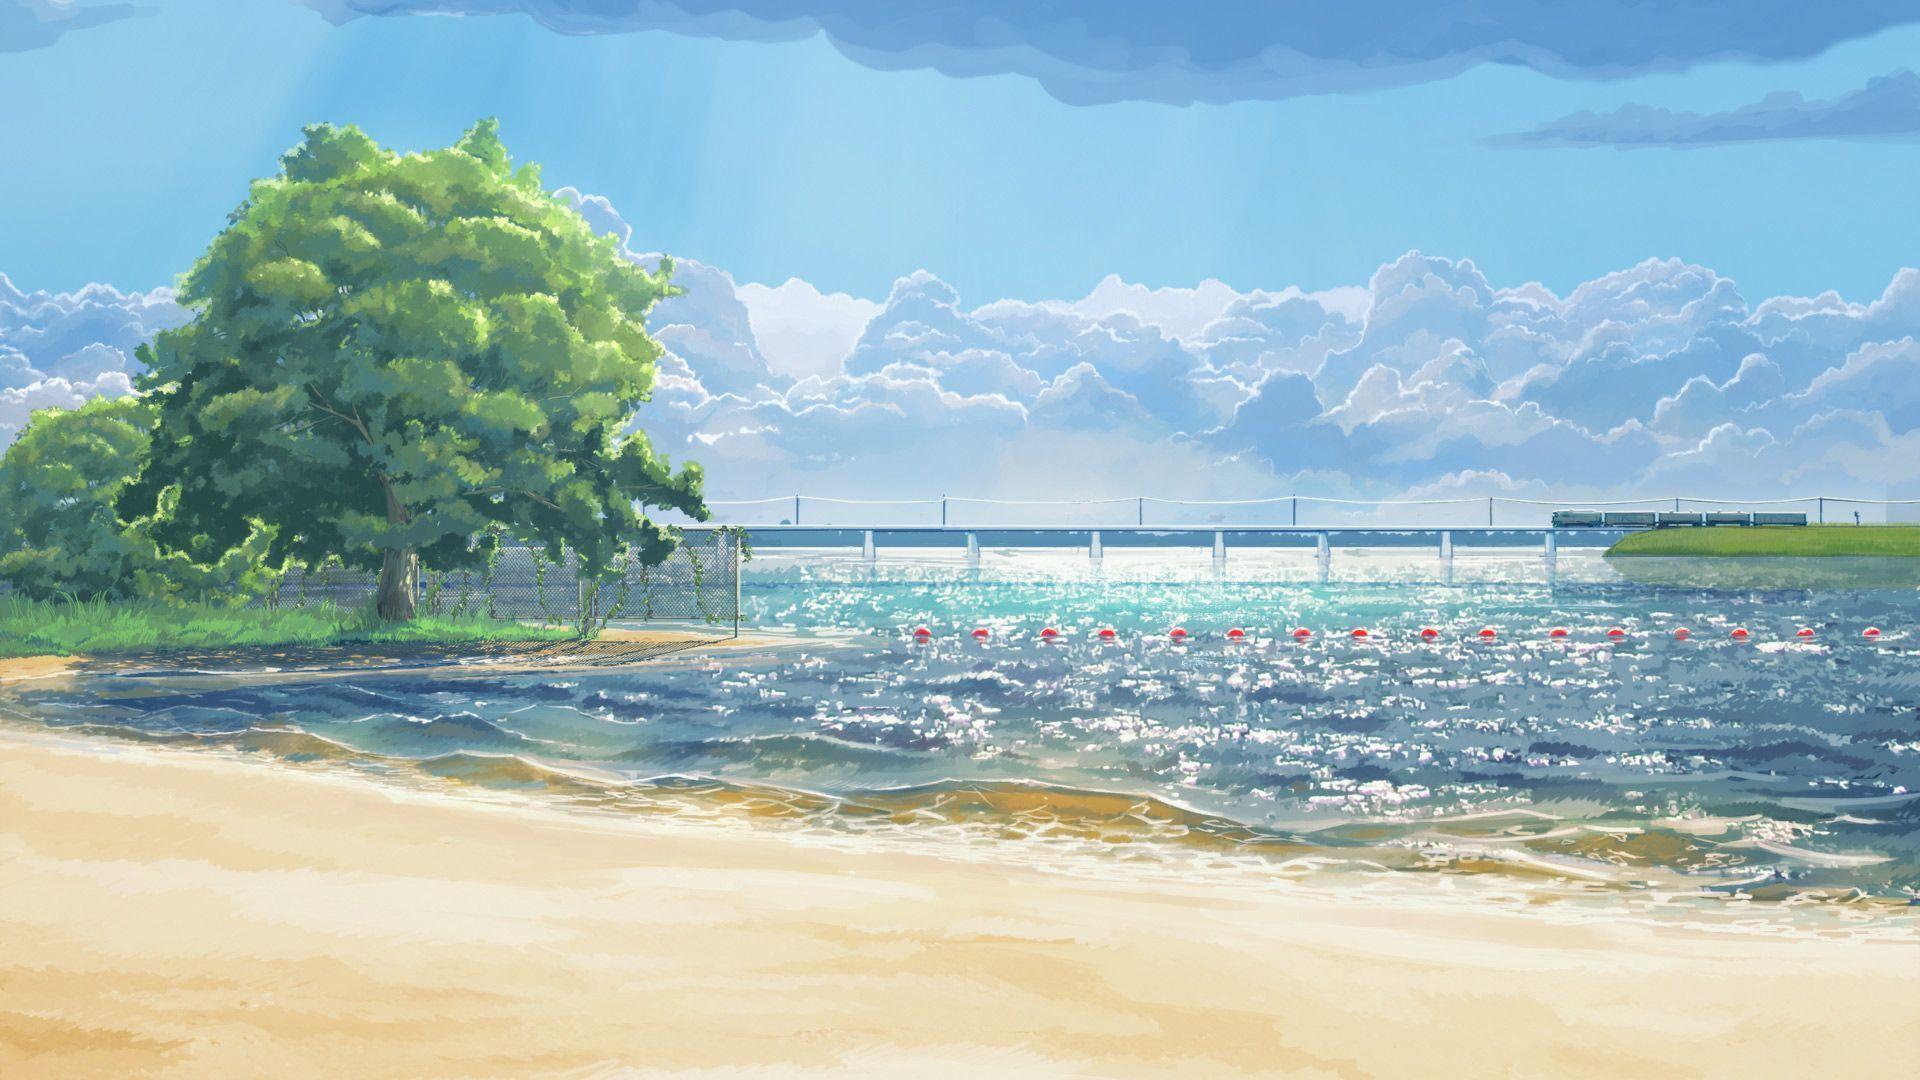 Pure Original Drawing Cartoon Anime Beach Landscape Background Backgrounds   PSD Free Download  Pikbest